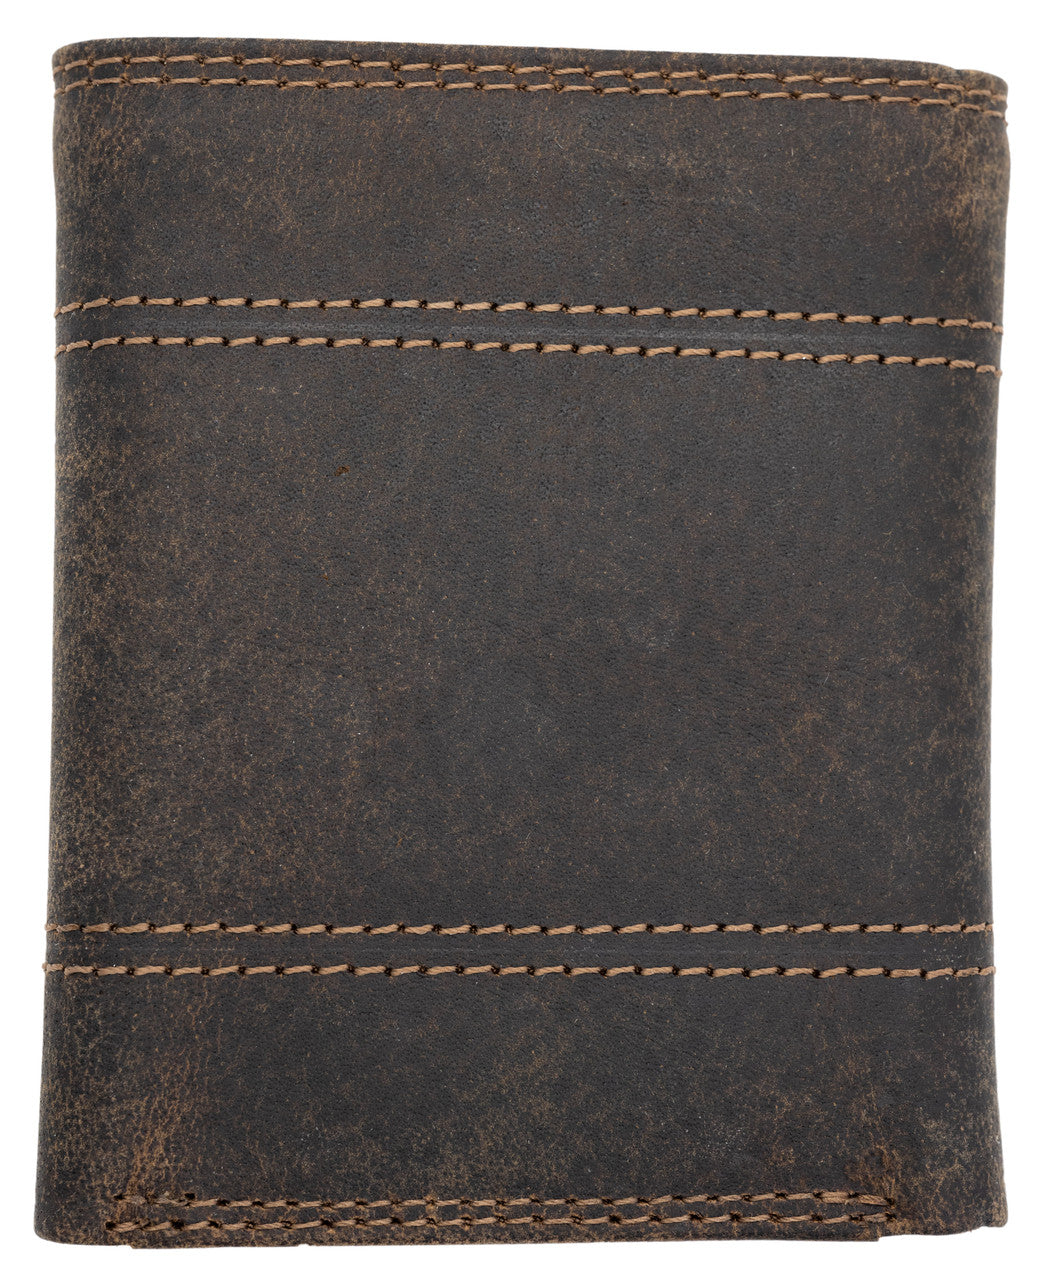 John Deere Oiled Leather TriFold Wallet - Brown - 4103000-200